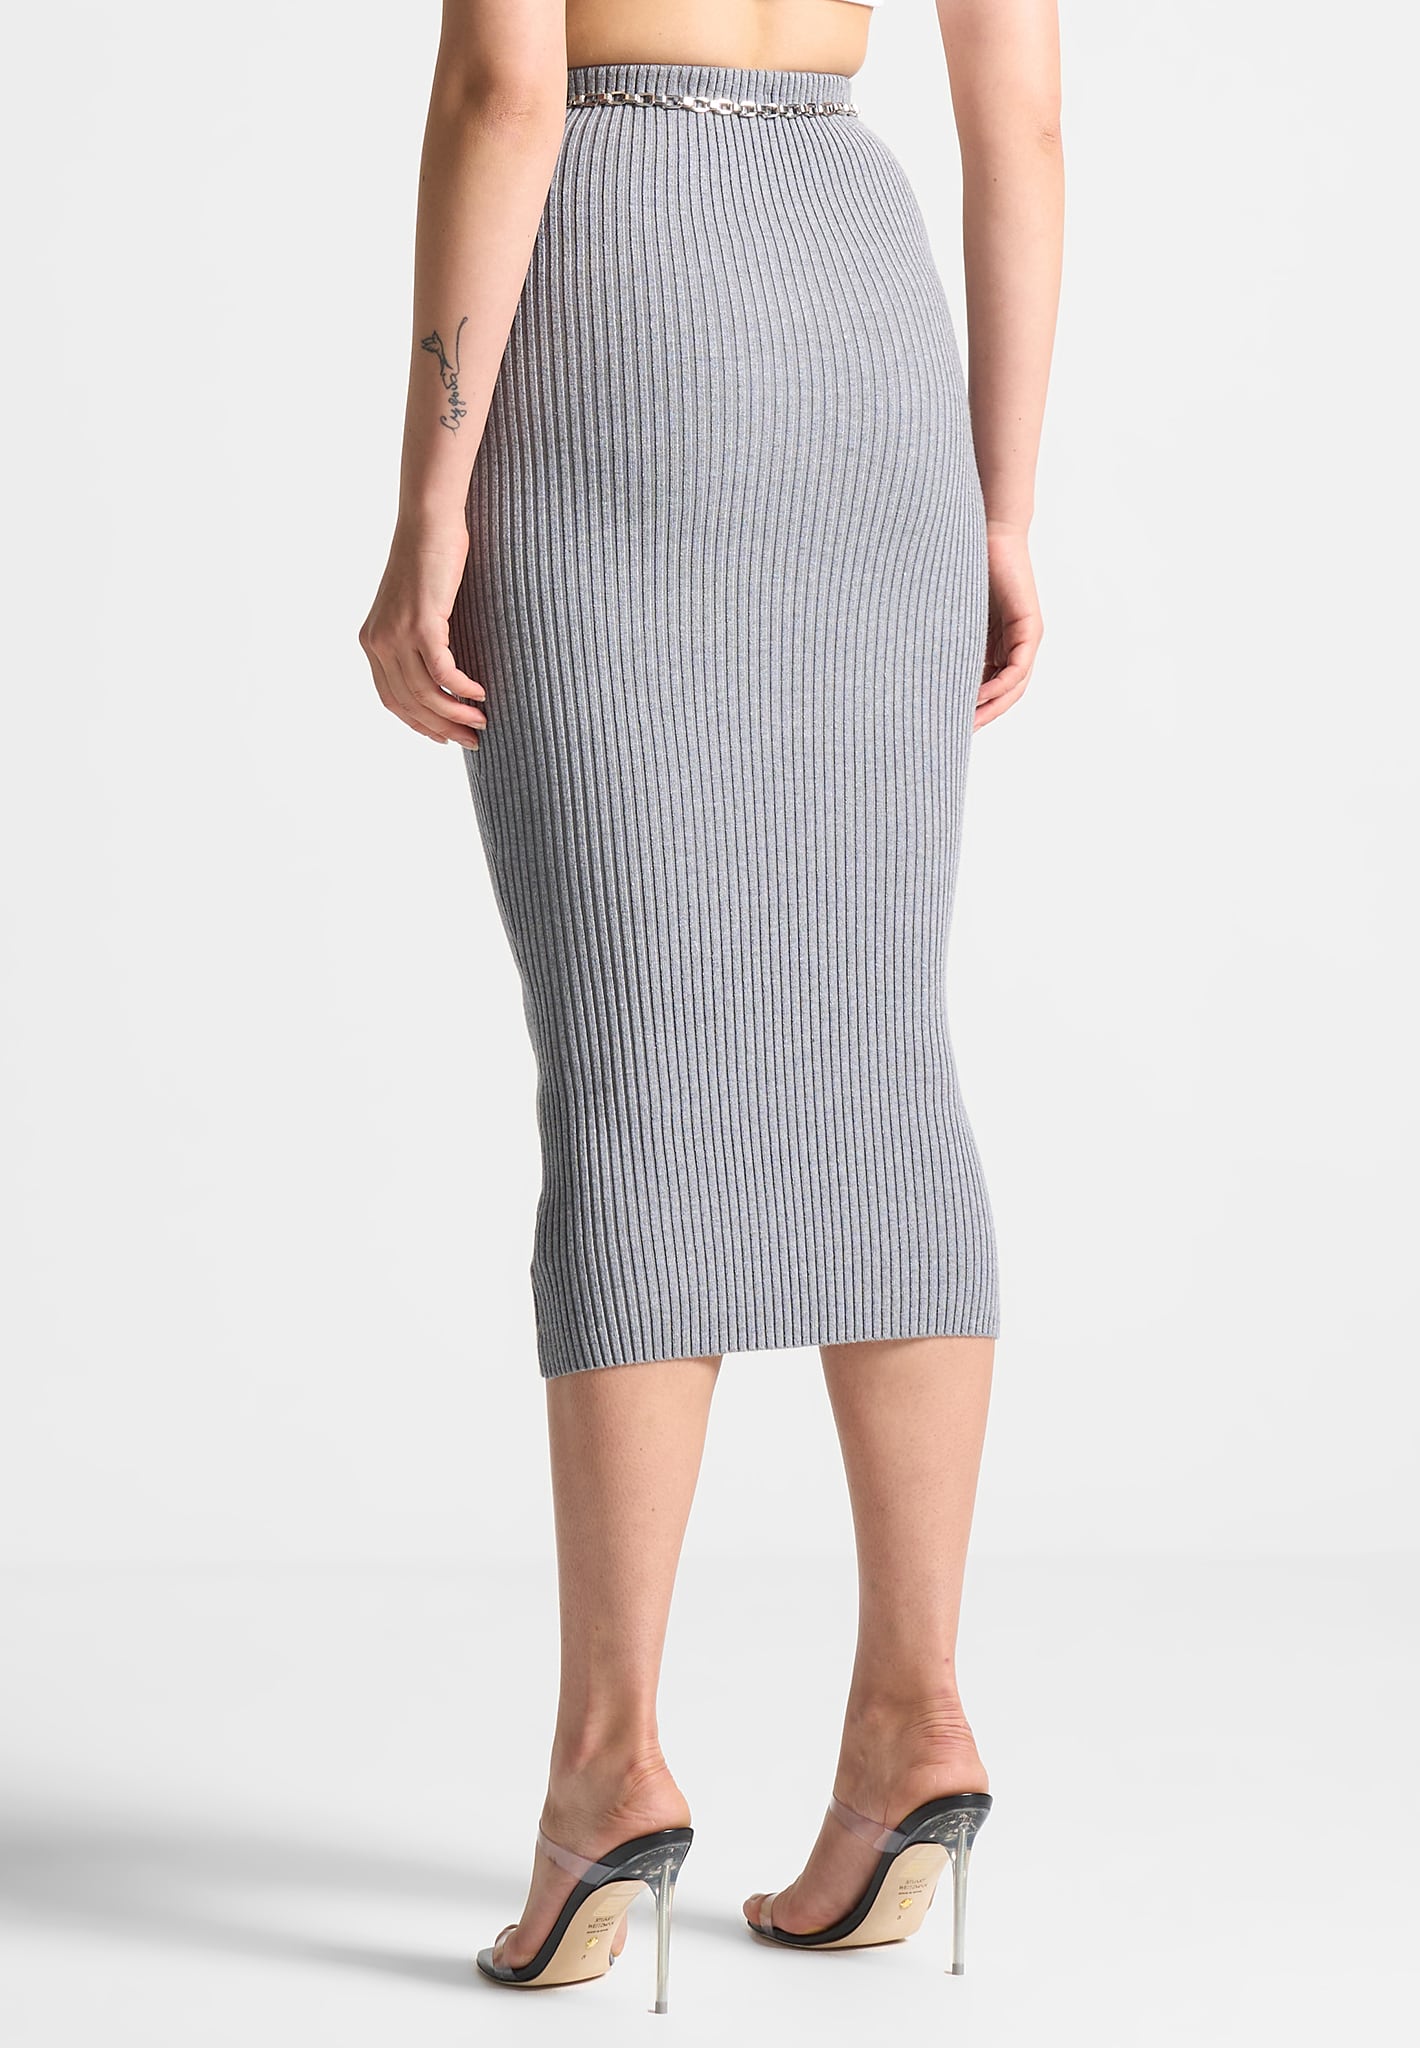 ribbed-knit-midaxi-skirt-with-chain-belt-grey